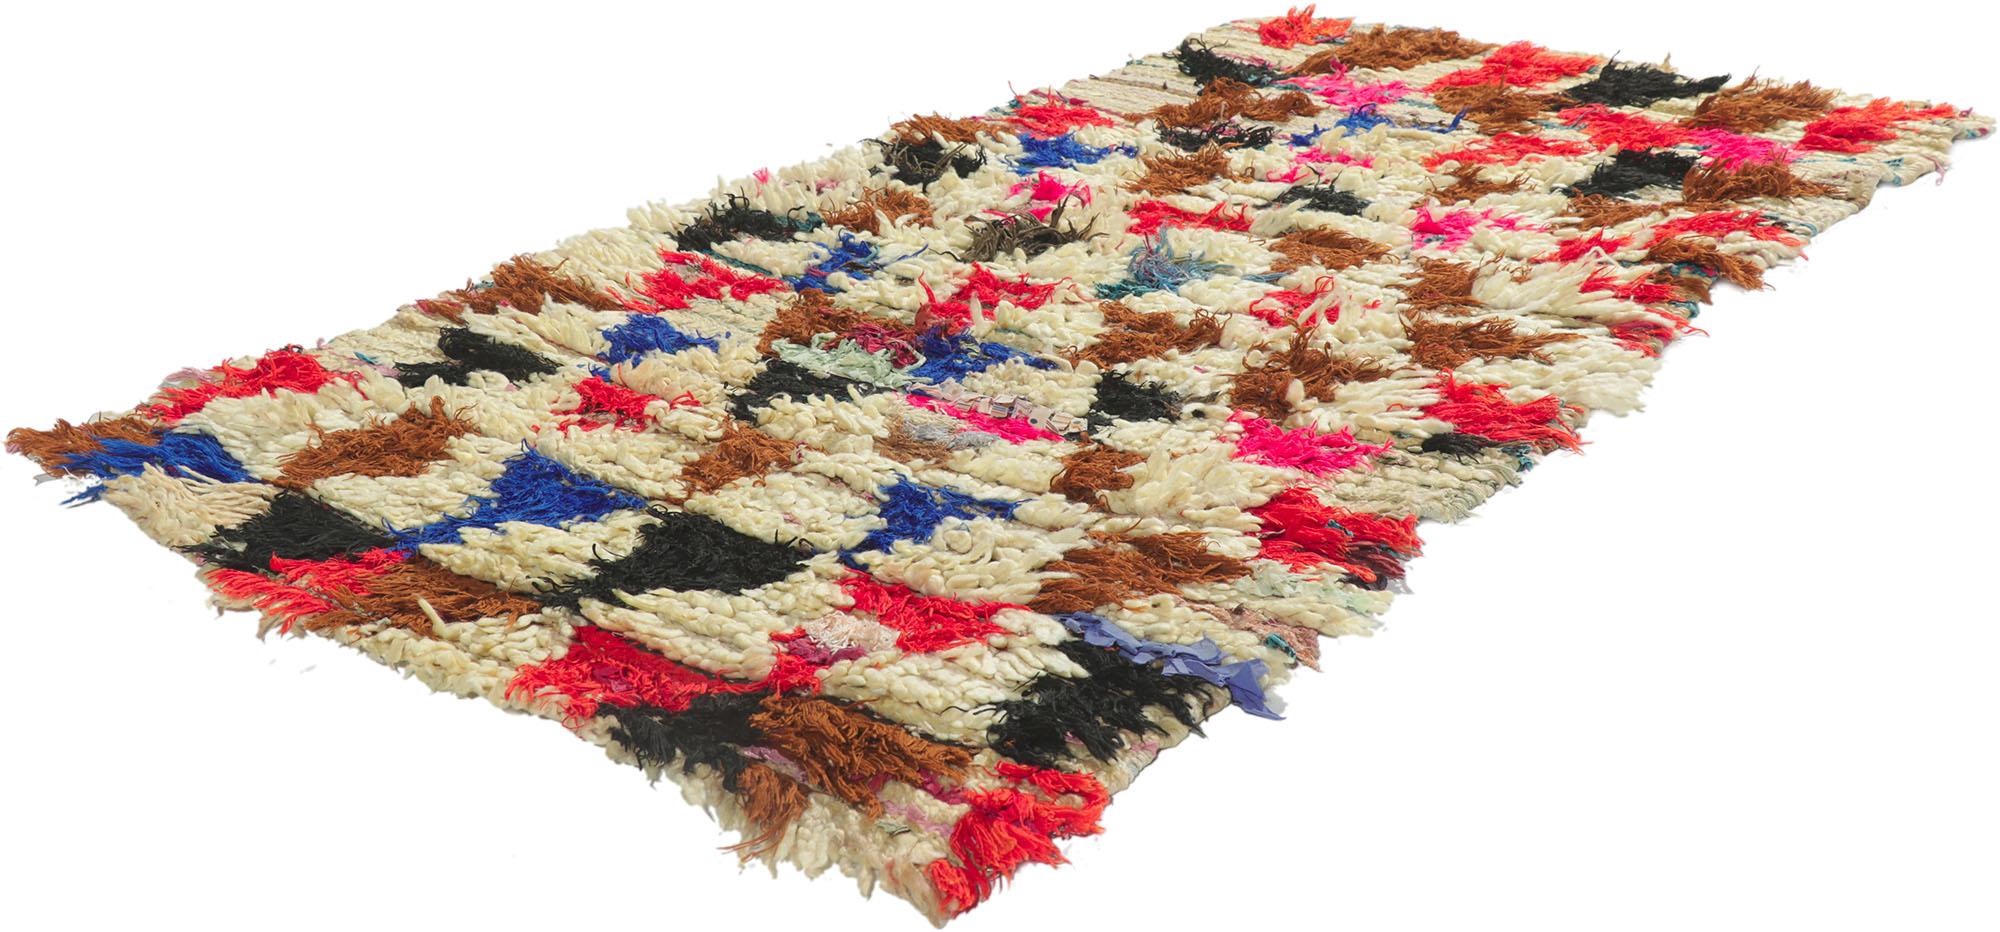 21617 Vintage Boucherouite Moroccan Rag Rug, 02'09 x 05'04.
Get ready to be spellbound by this hand knotted wool vintage Boucherouite Moroccan rag rug that's full of nomadic charm with a rugged boho chic twist. This woven beauty is a kaleidoscope of